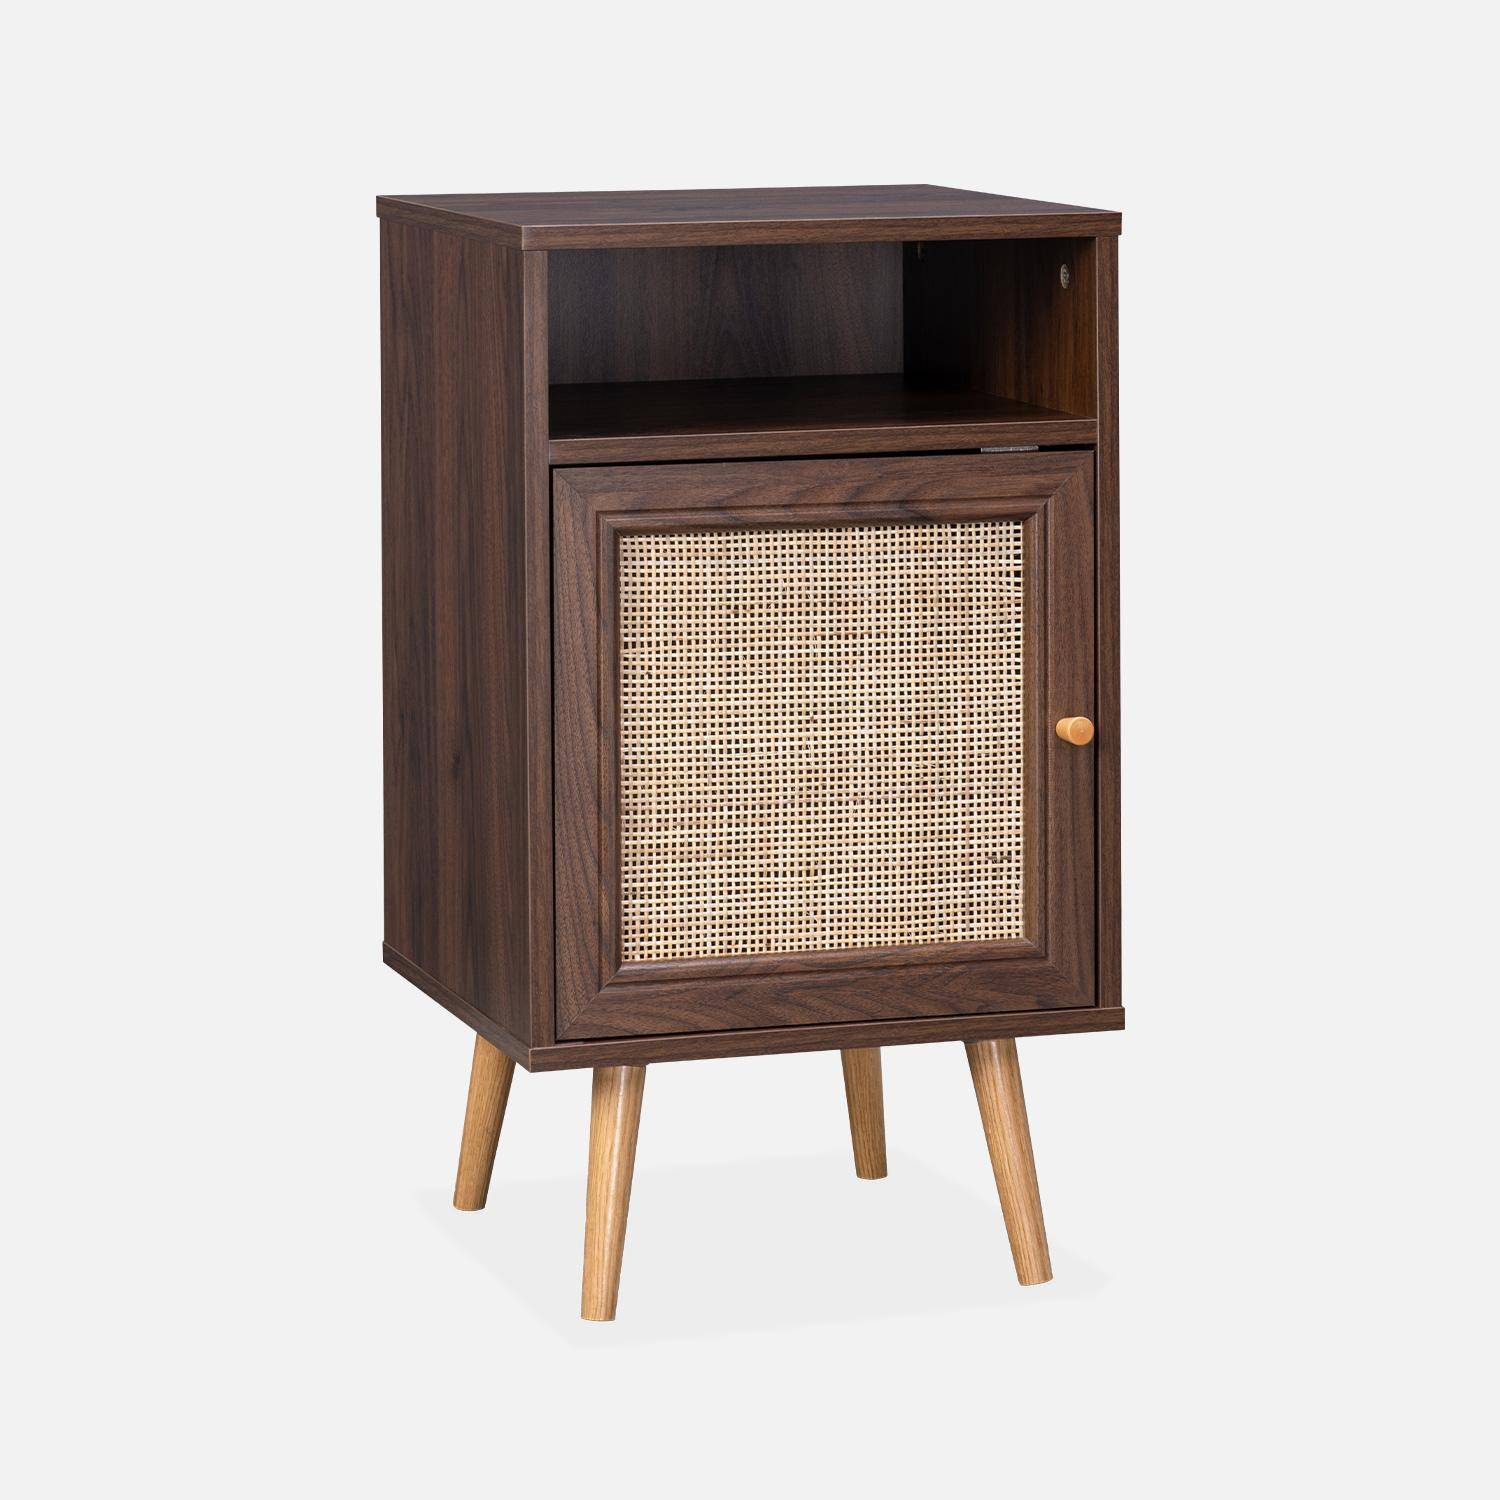 Scandi-style wood and cane rattan bedside table with cupboard, 40x39x70cm - Boheme - Dark Wood colour Photo2